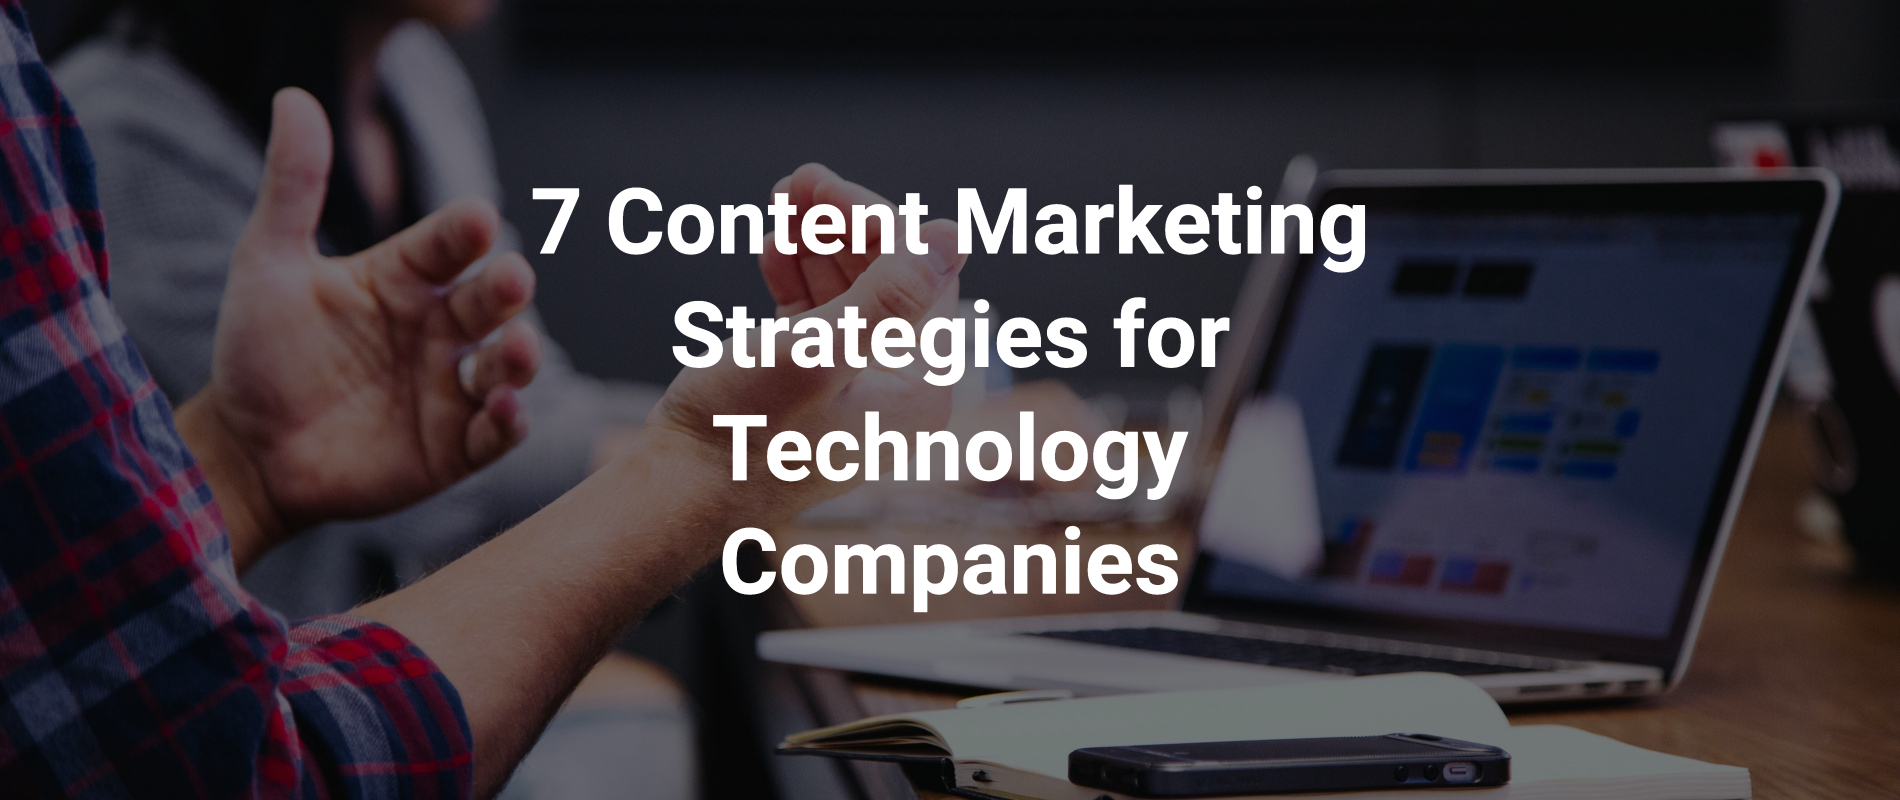 Seven content marketing strategies, ideas and tactics technology companies should put front and center.